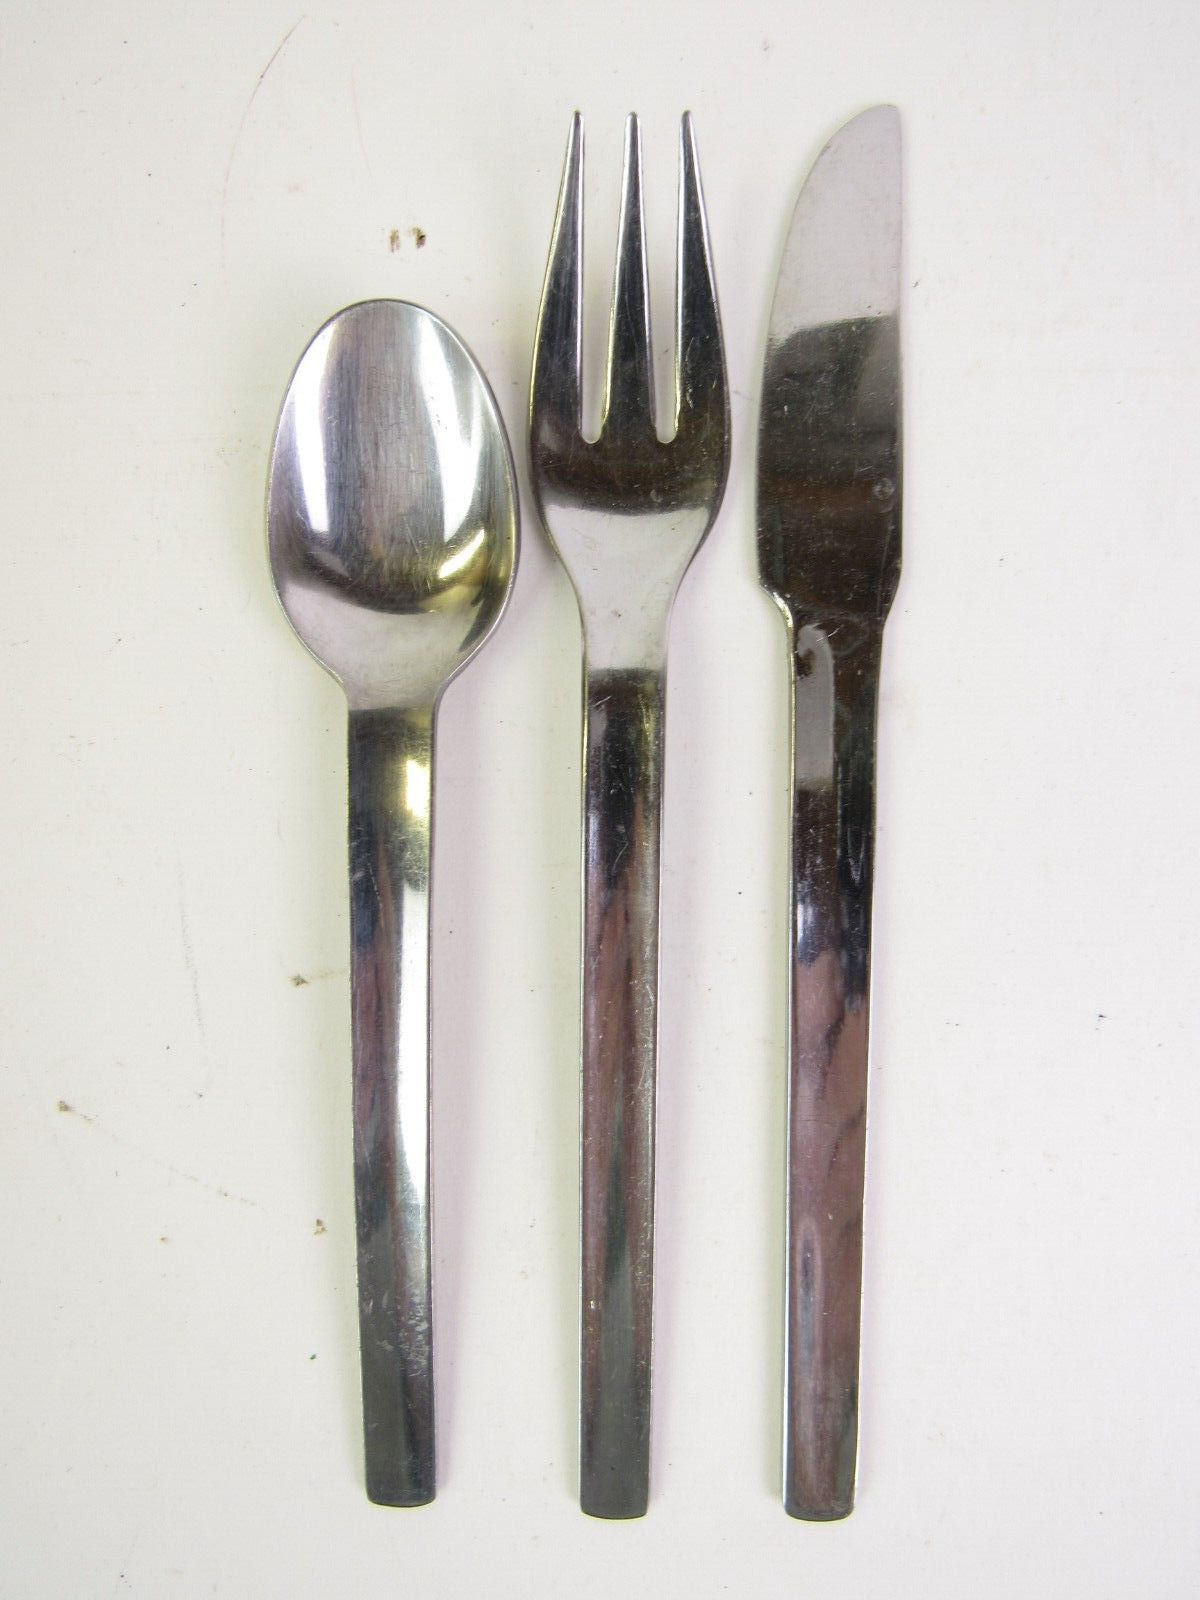 Alitalia Airlines Stainless Silverware, 3-Piece Set